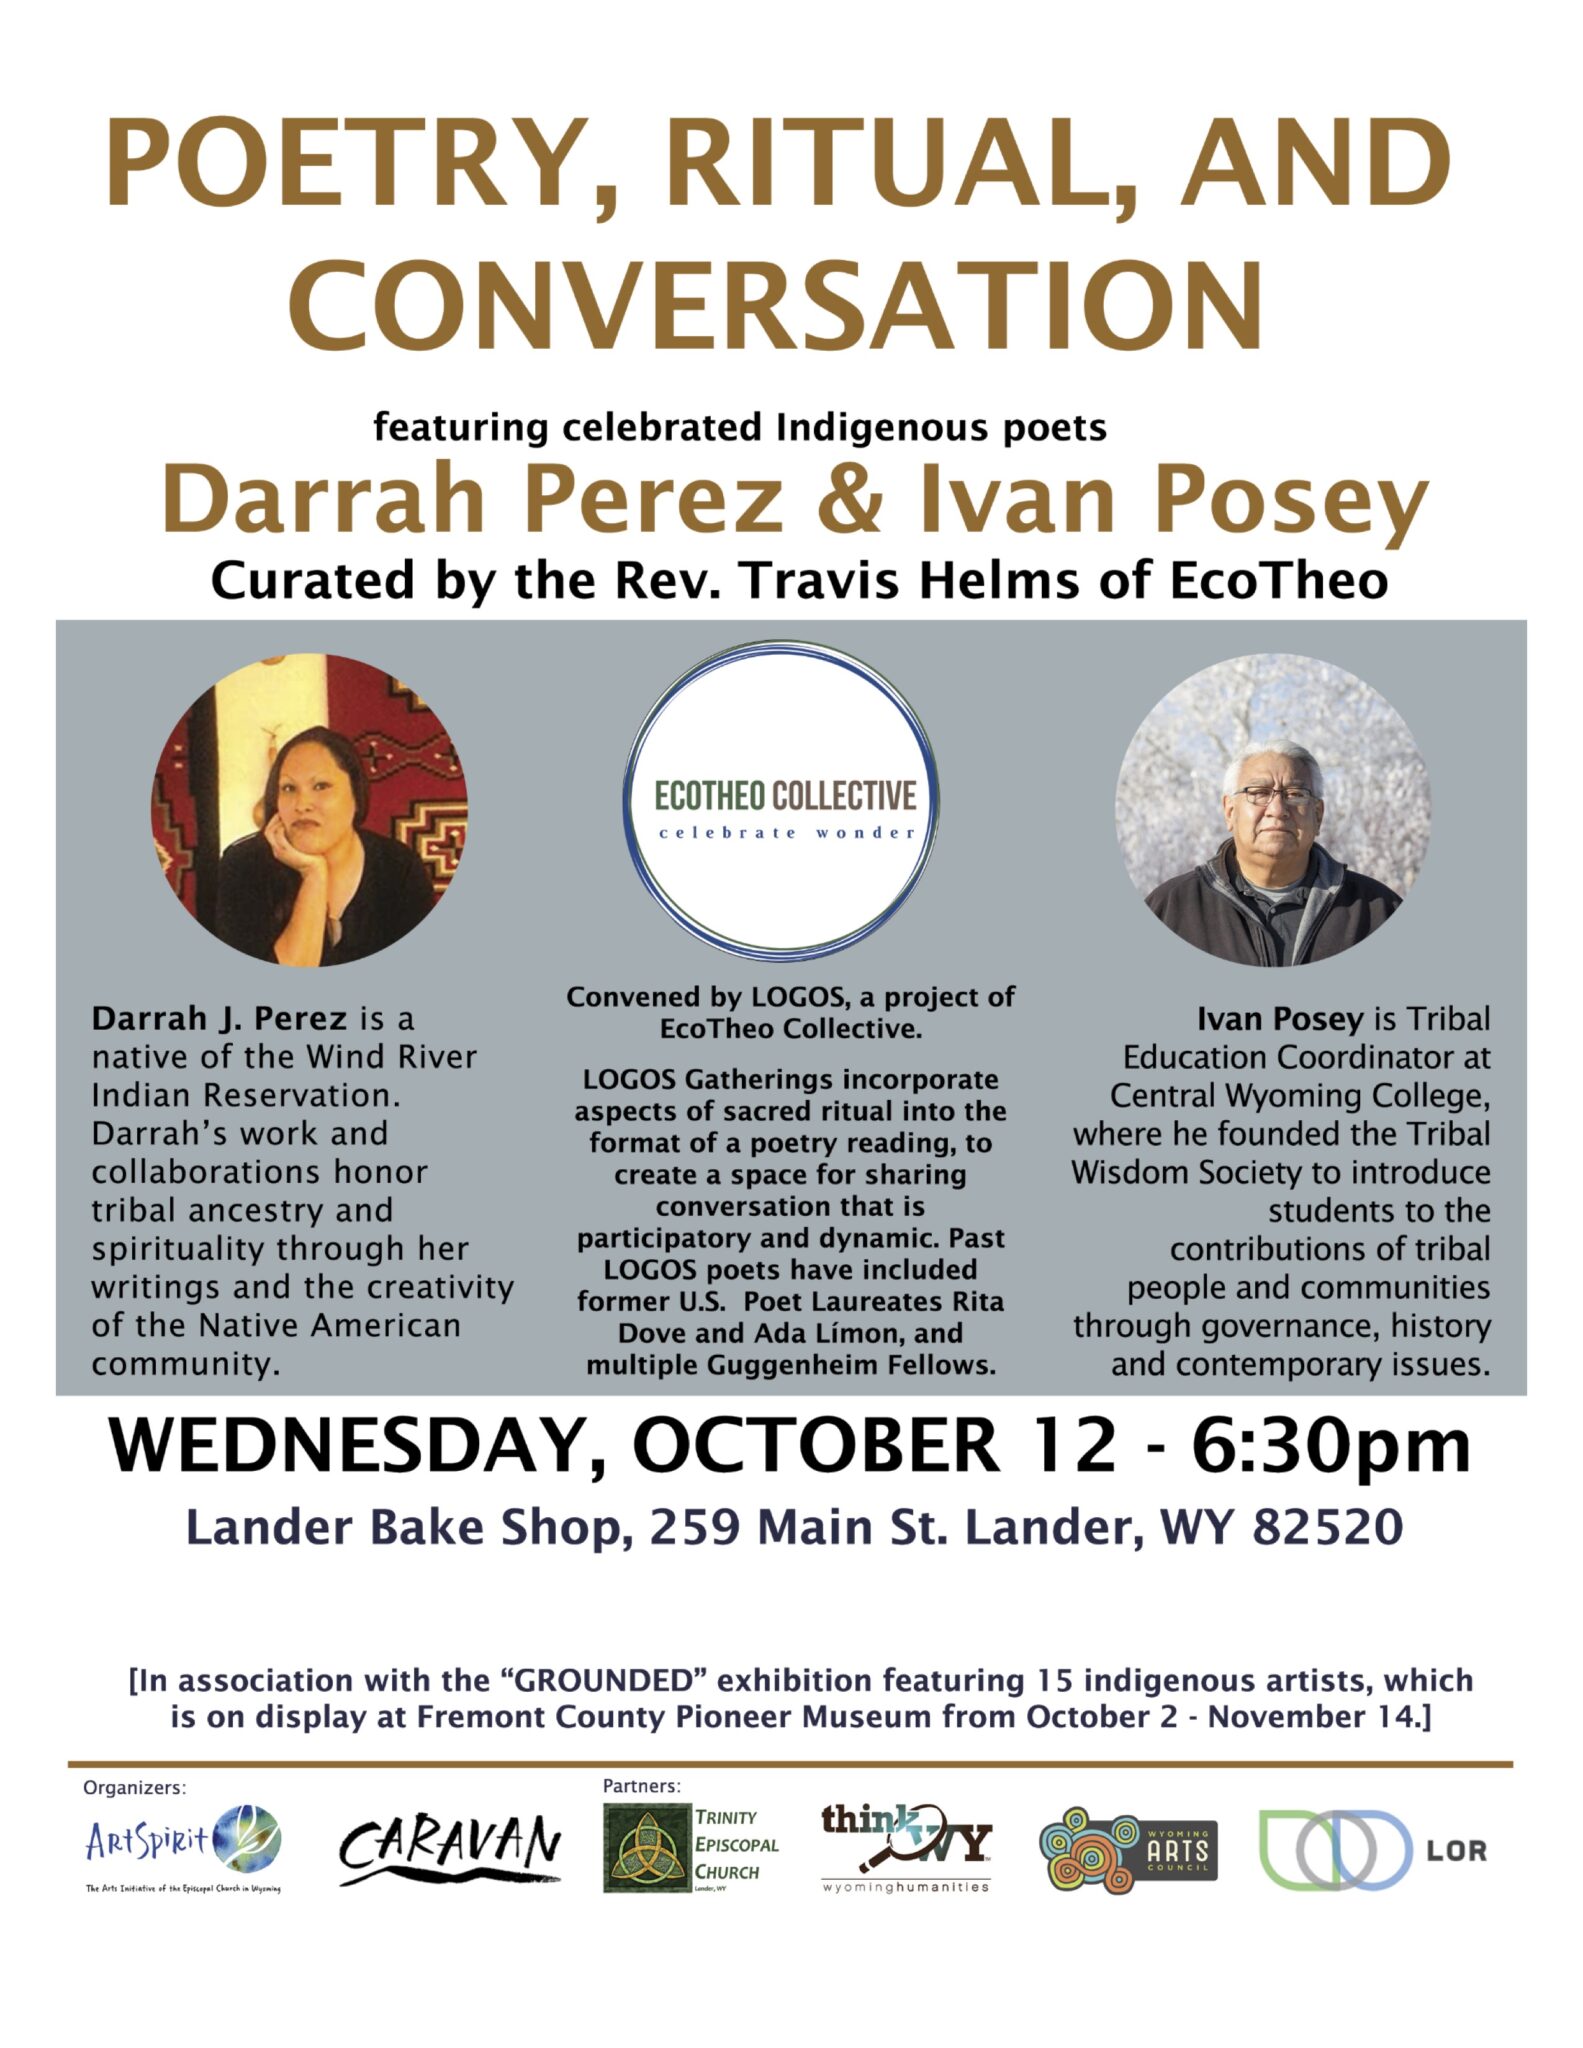 An Evening of Poetry & Conversation with Indigenous Poets